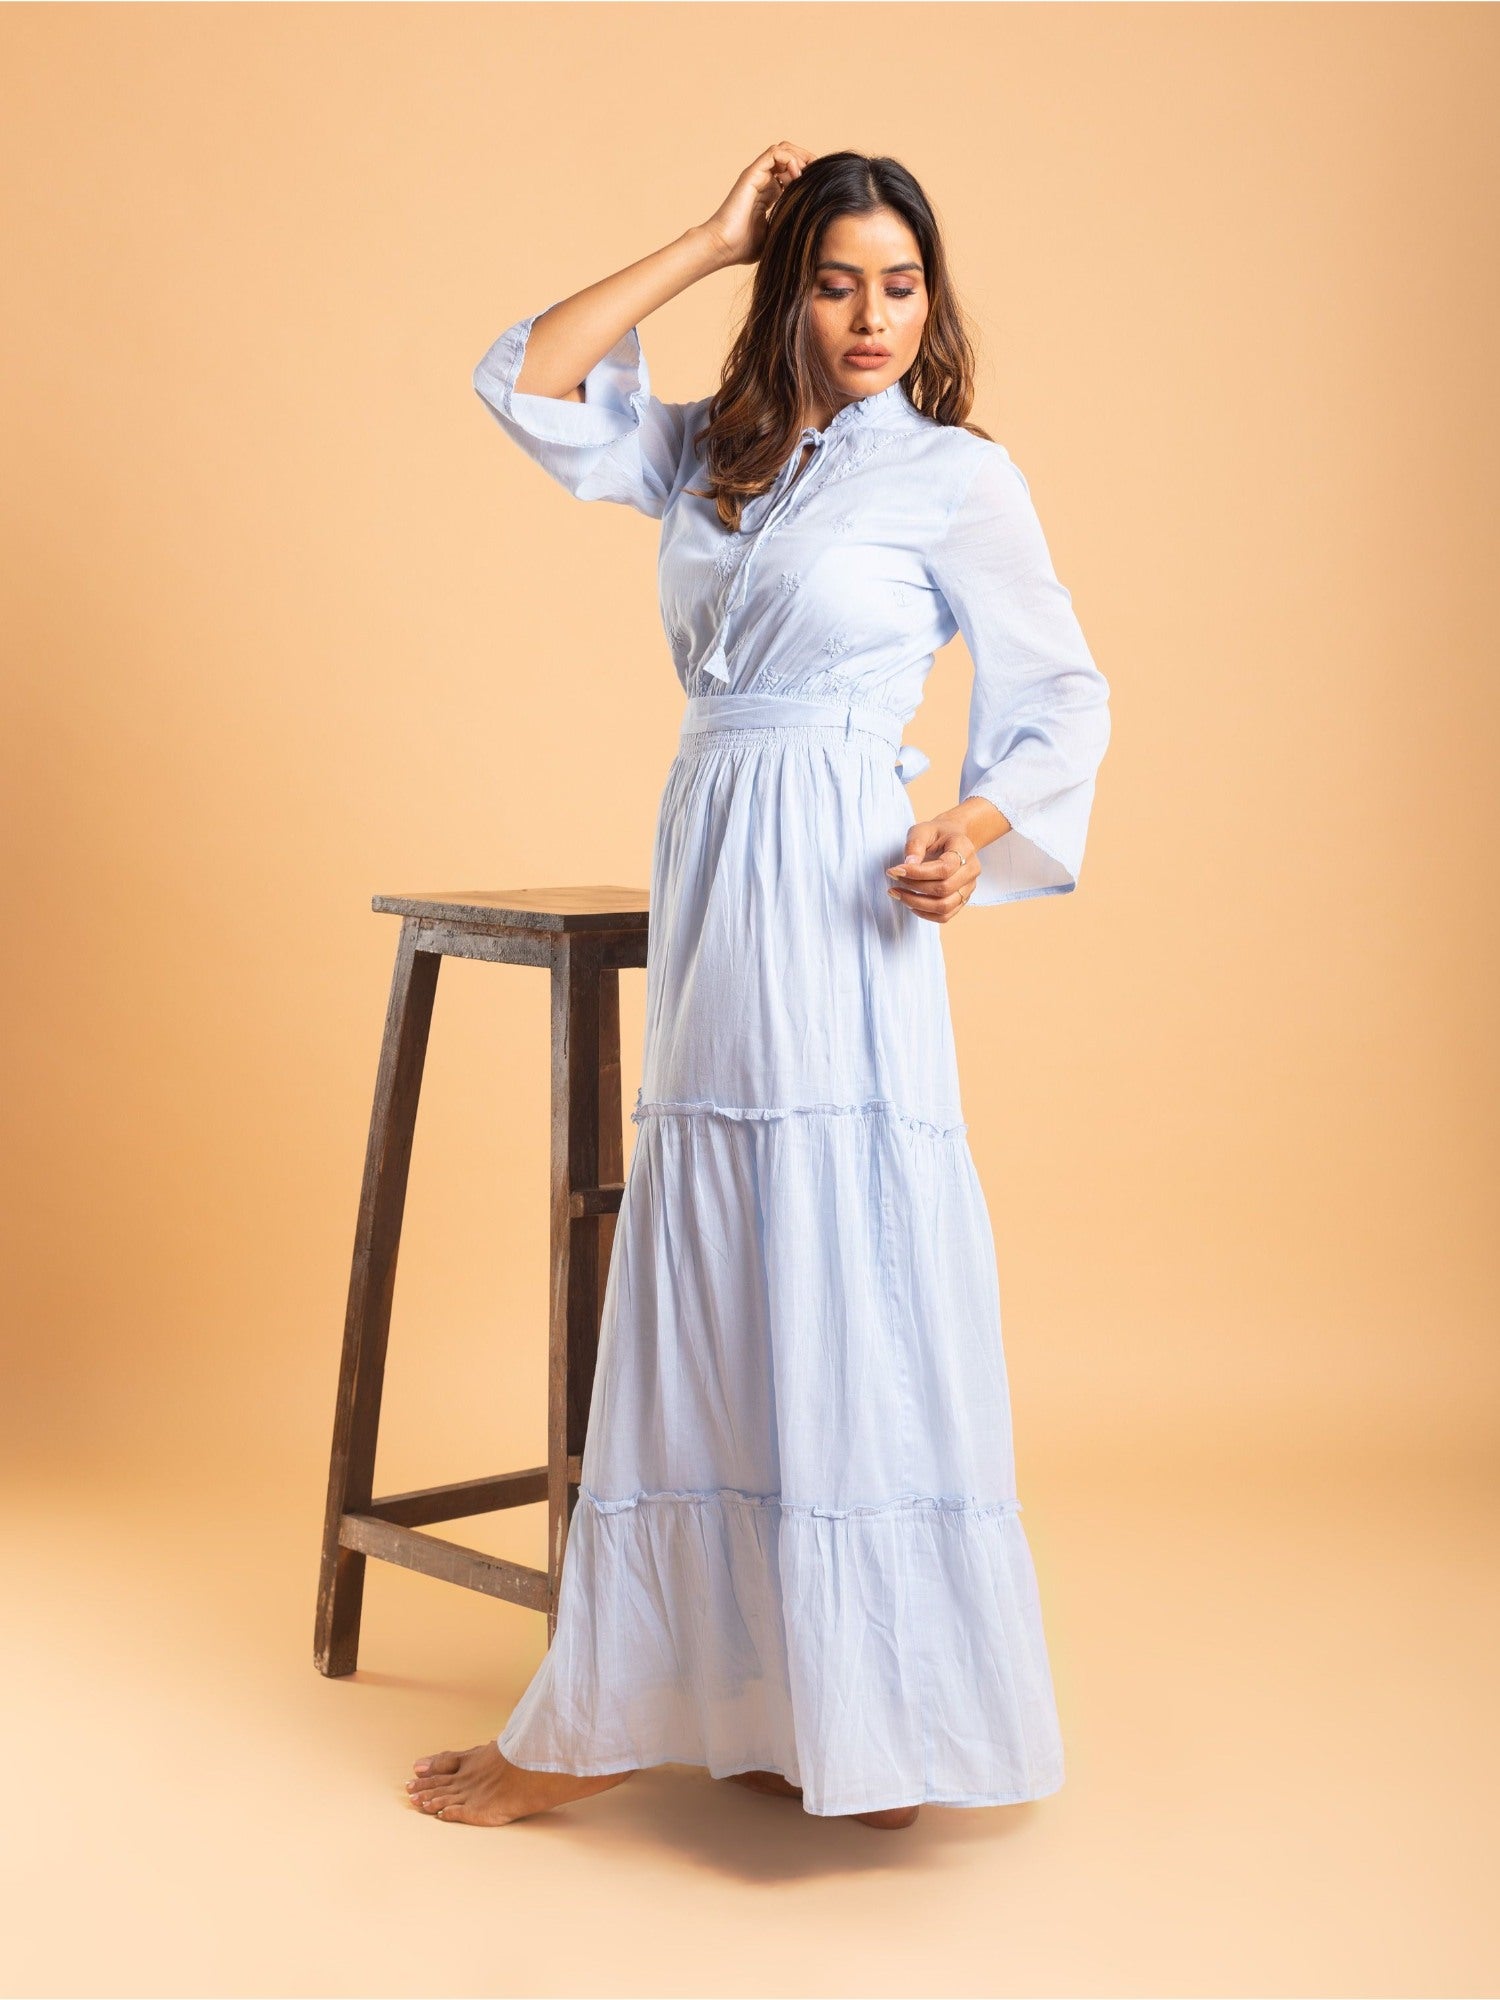 Western style gown full flare – vastrachowk